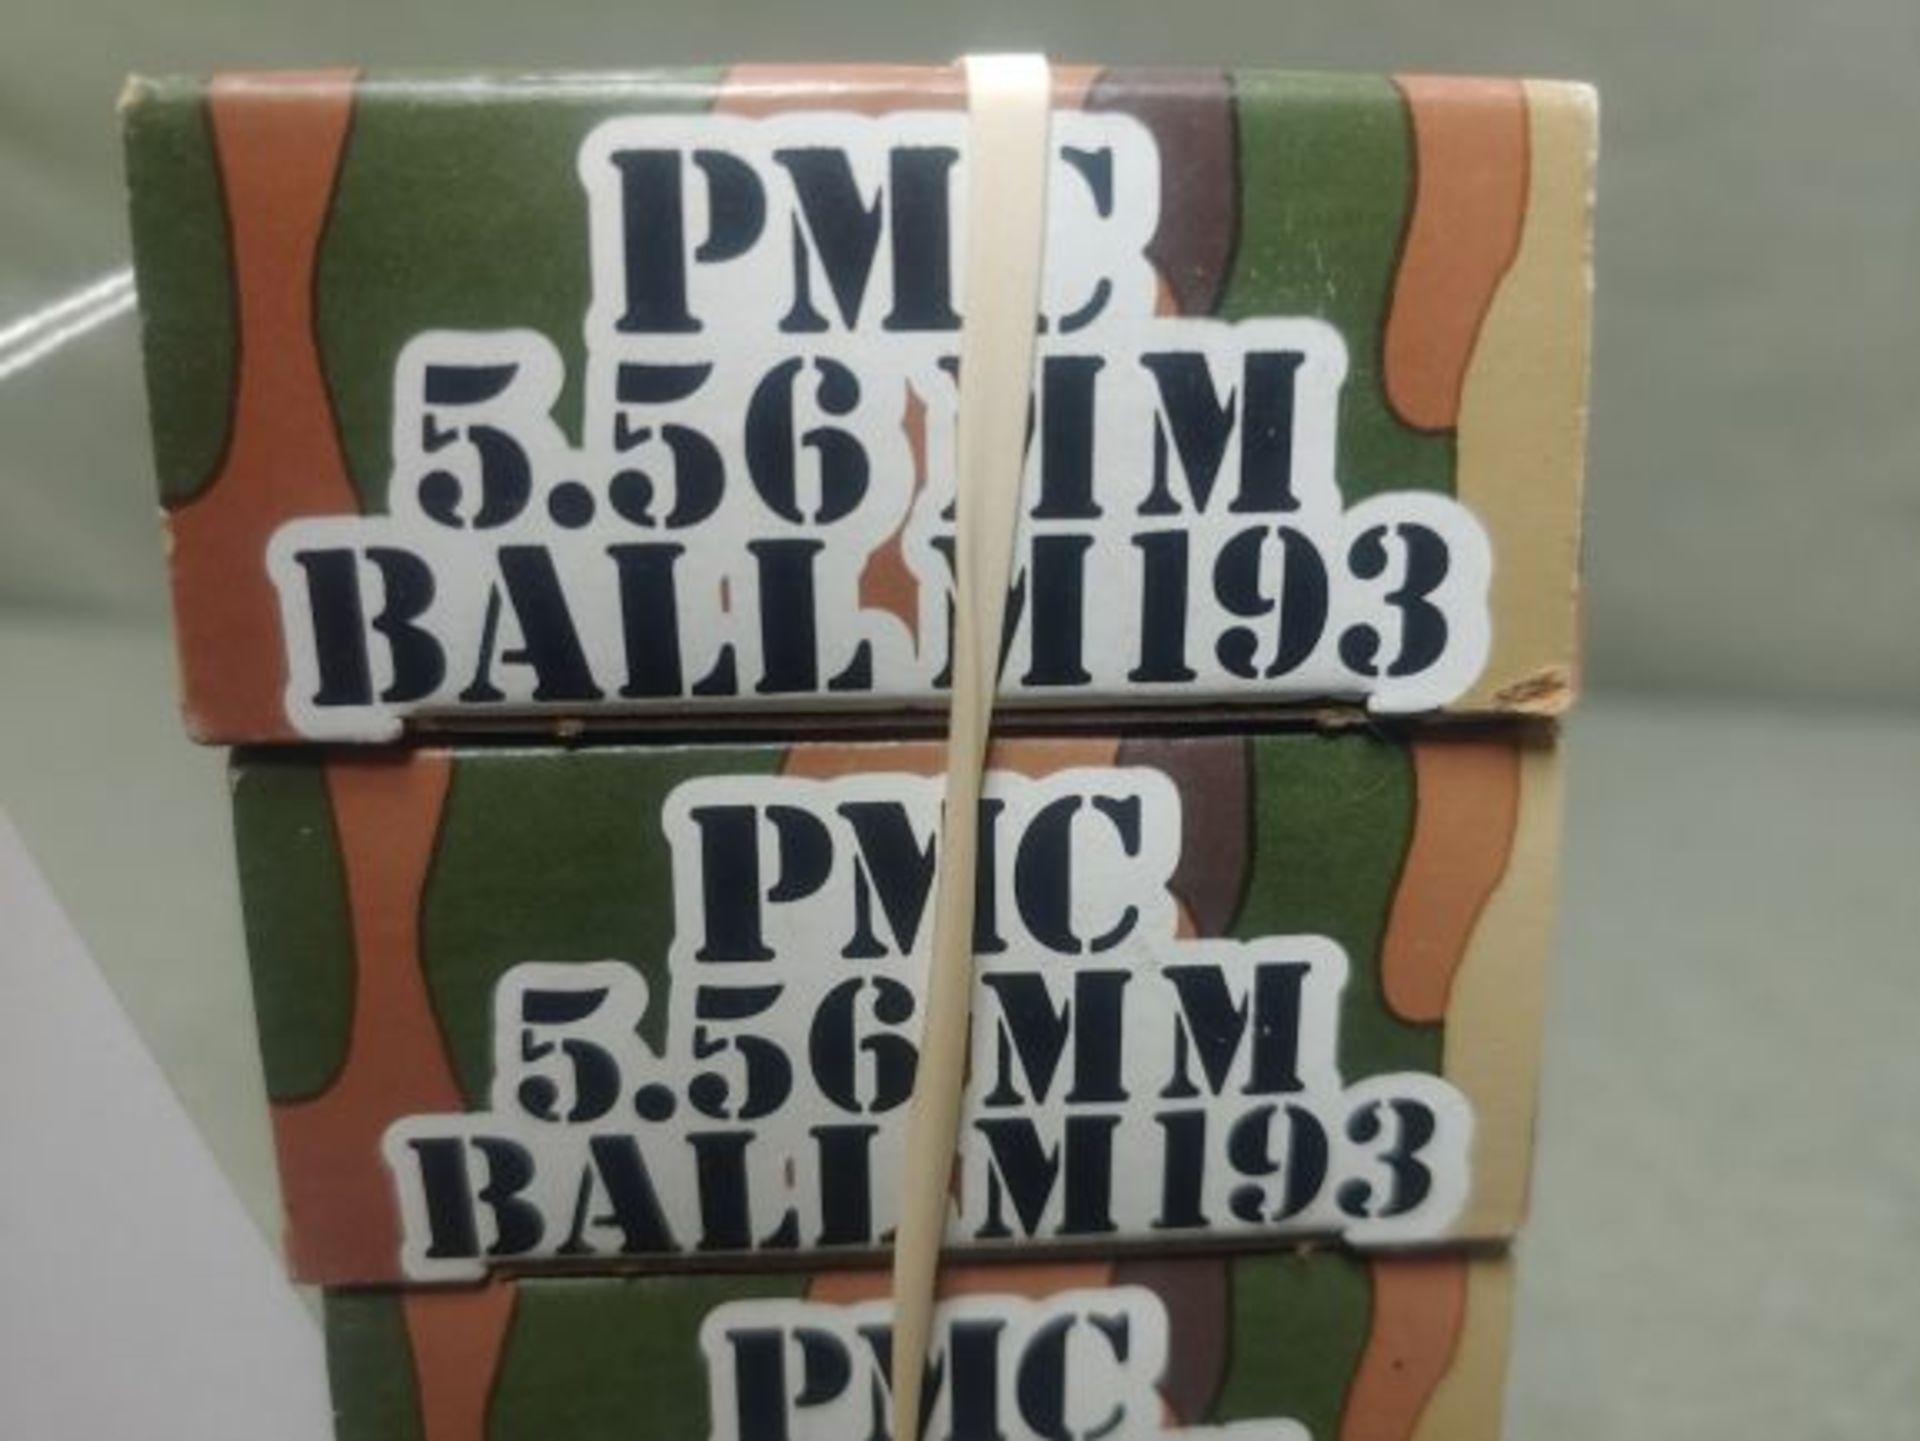 439. PMC 5.56mm Ball M193, 20 Rnd. Boxes (5x the Money) - Image 2 of 2